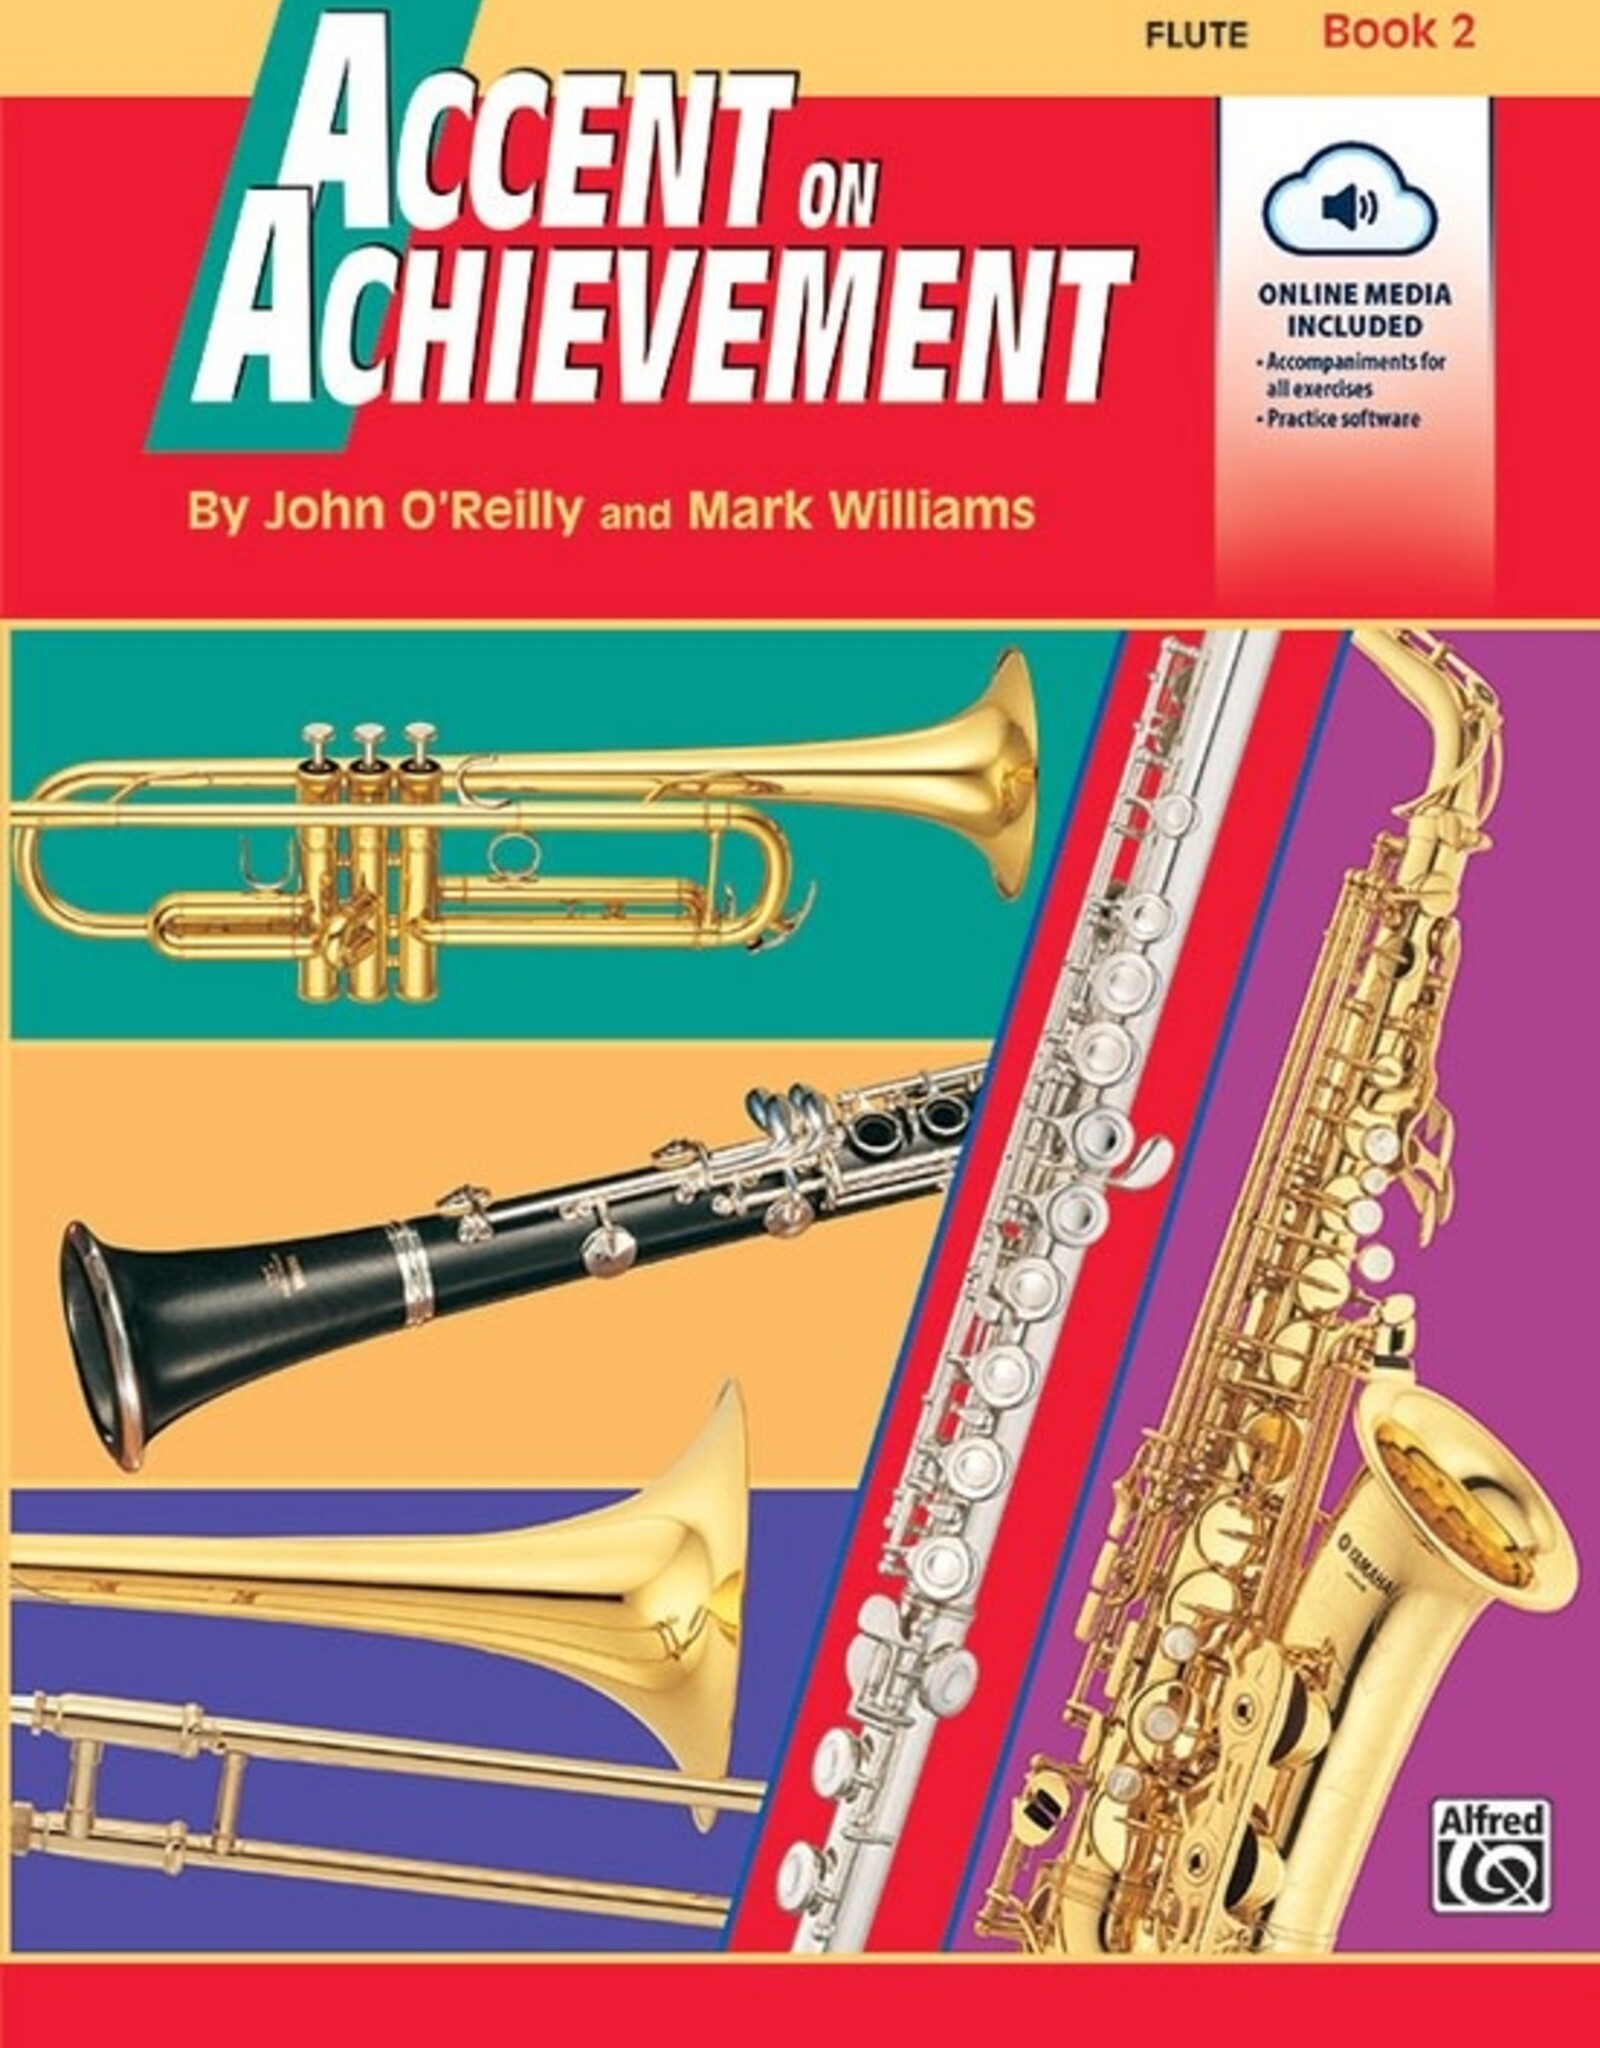 Alfred Accent on Achievement, Book 2 with Online Media - Flute